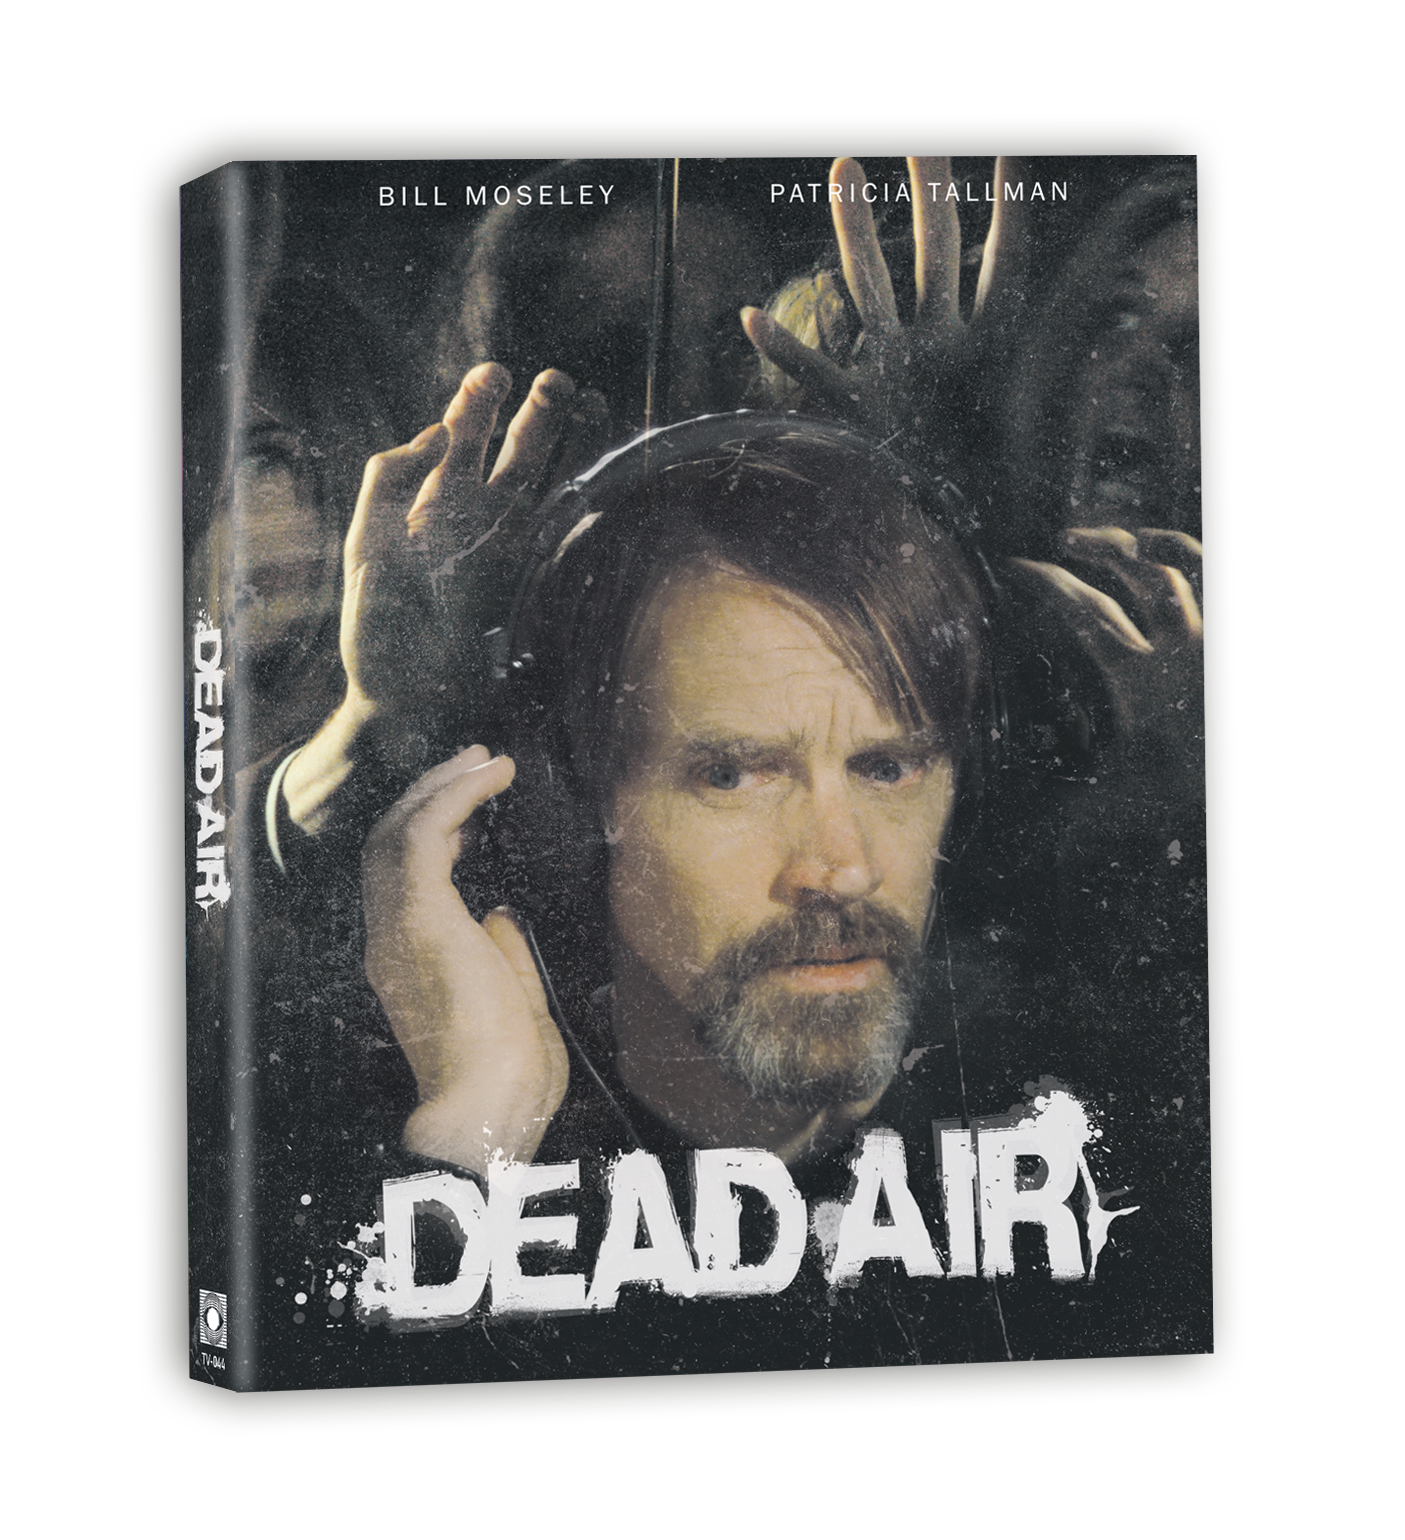 Dead Air (2009) Blu-ray with Slip